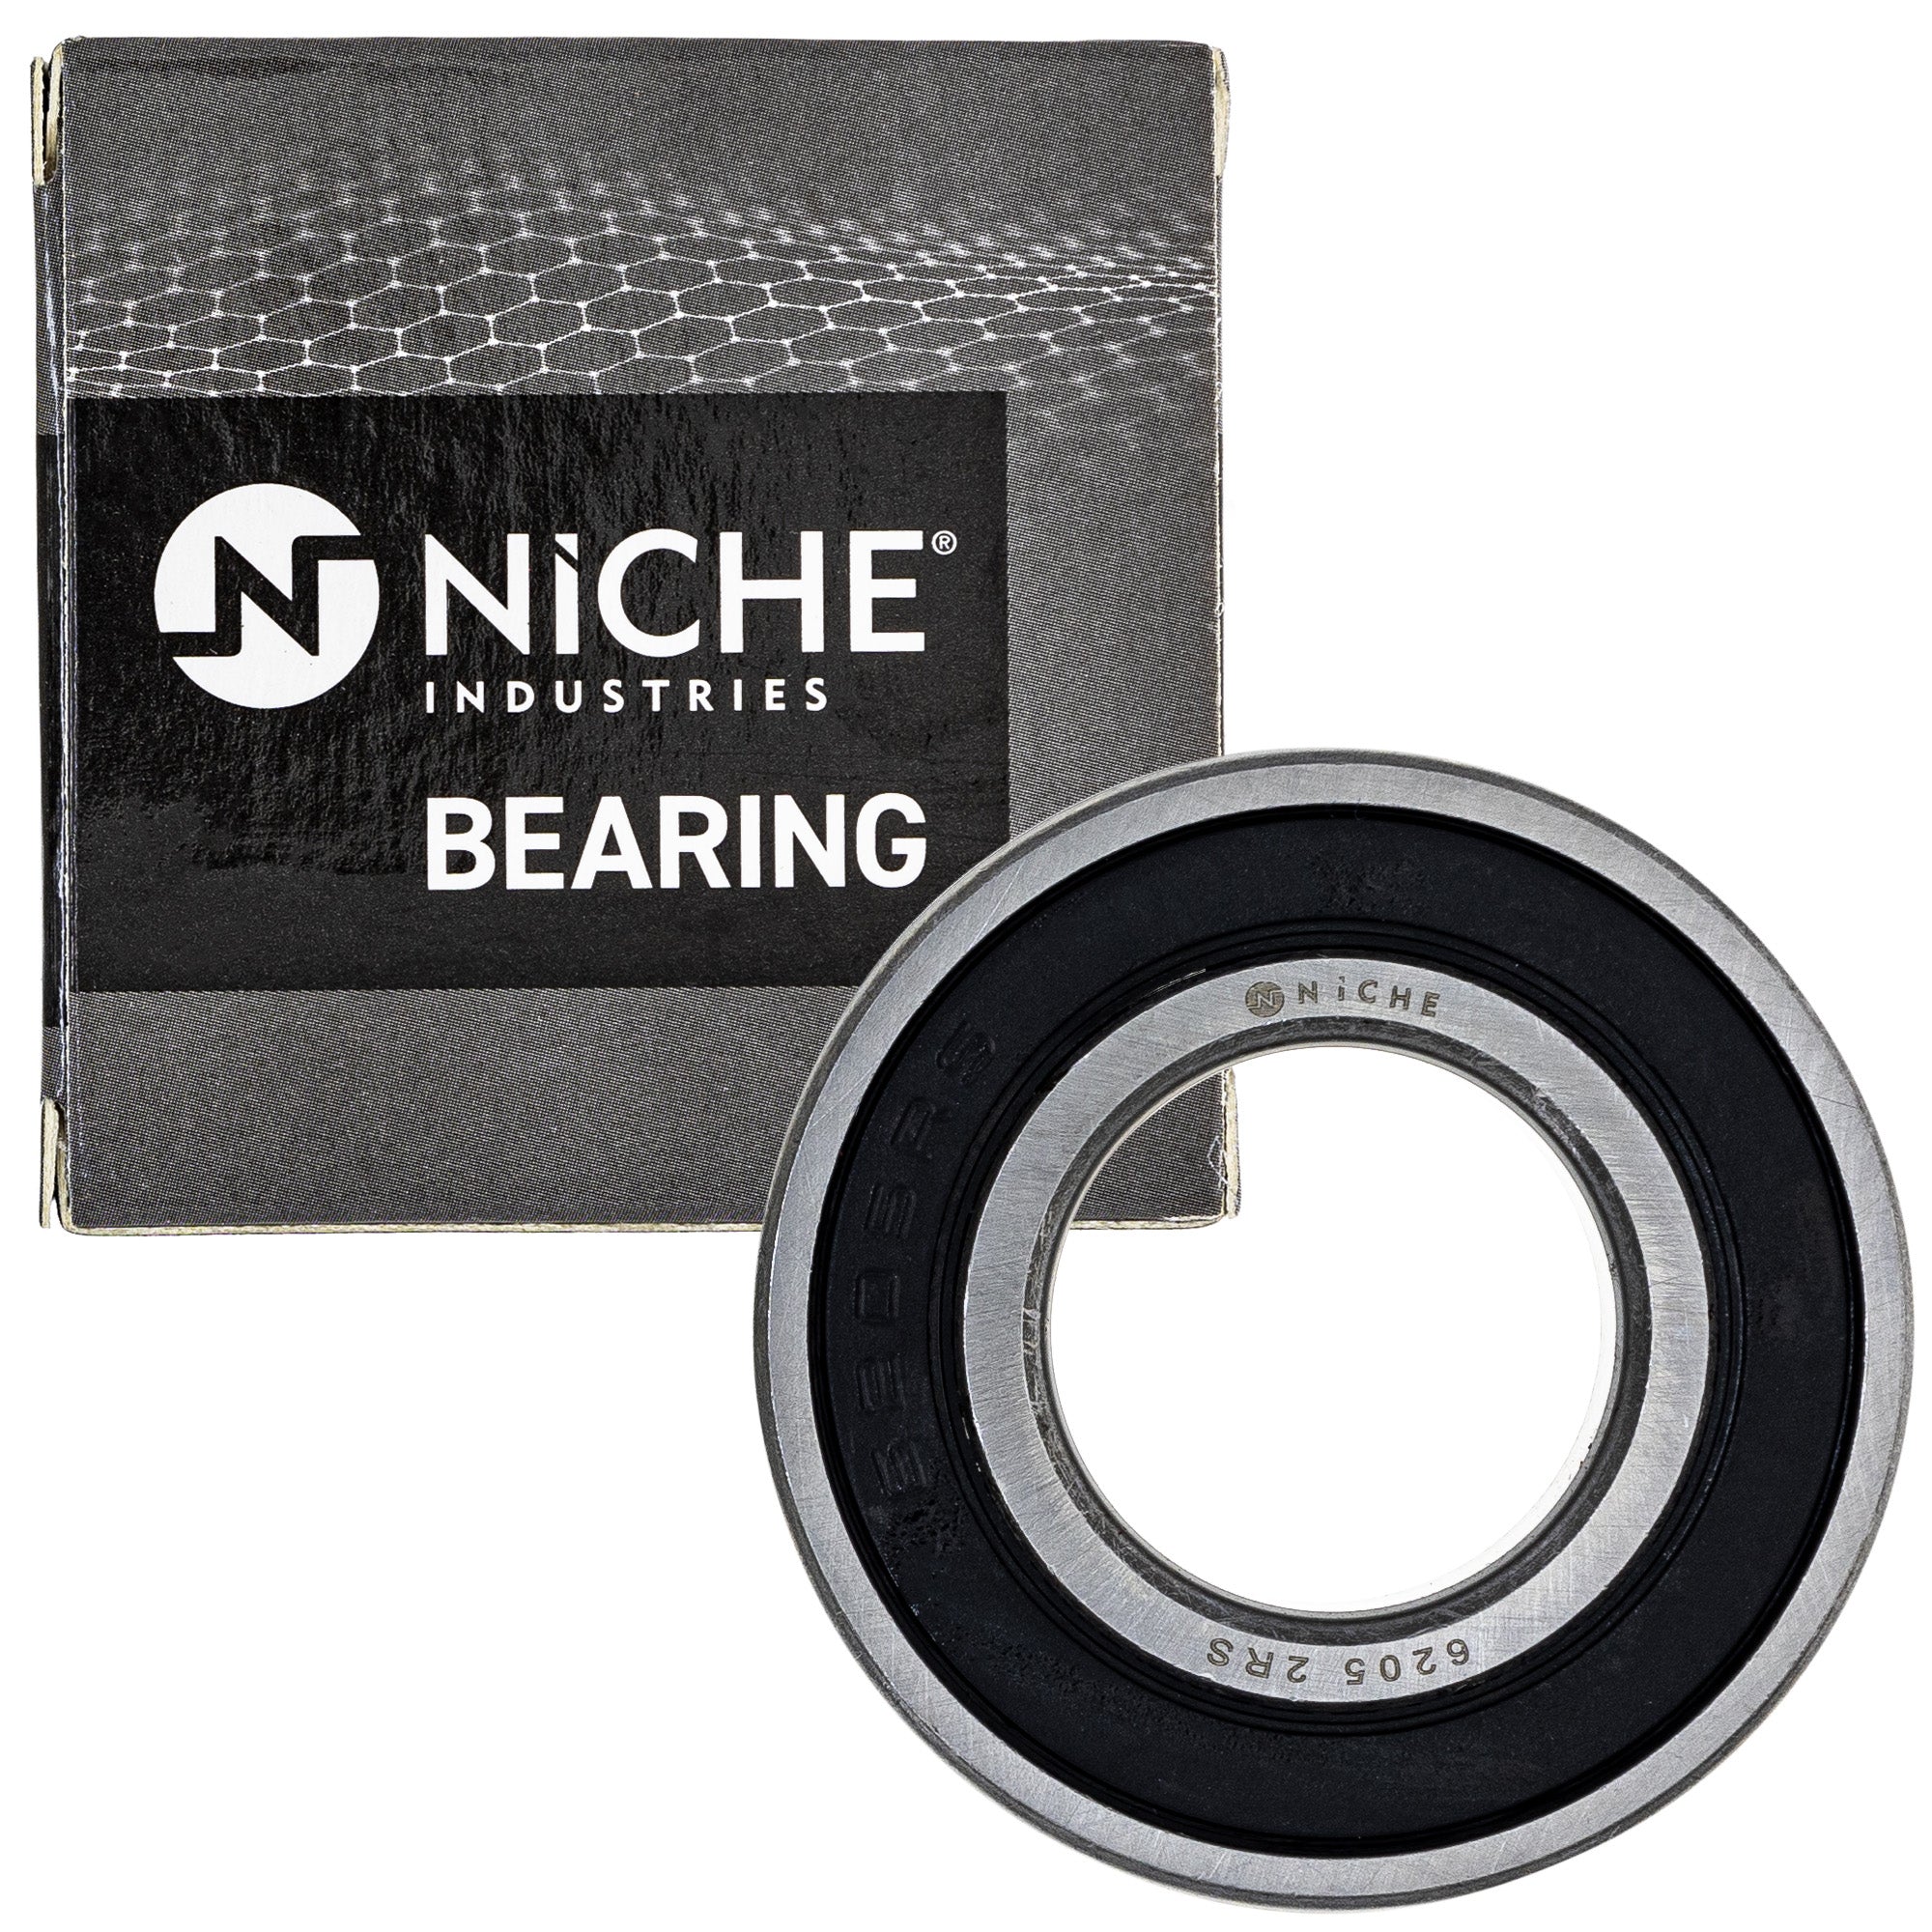 NICHE MK1009138 Wheel Bearing Seal Kit for zOTHER Ref No TL1000S